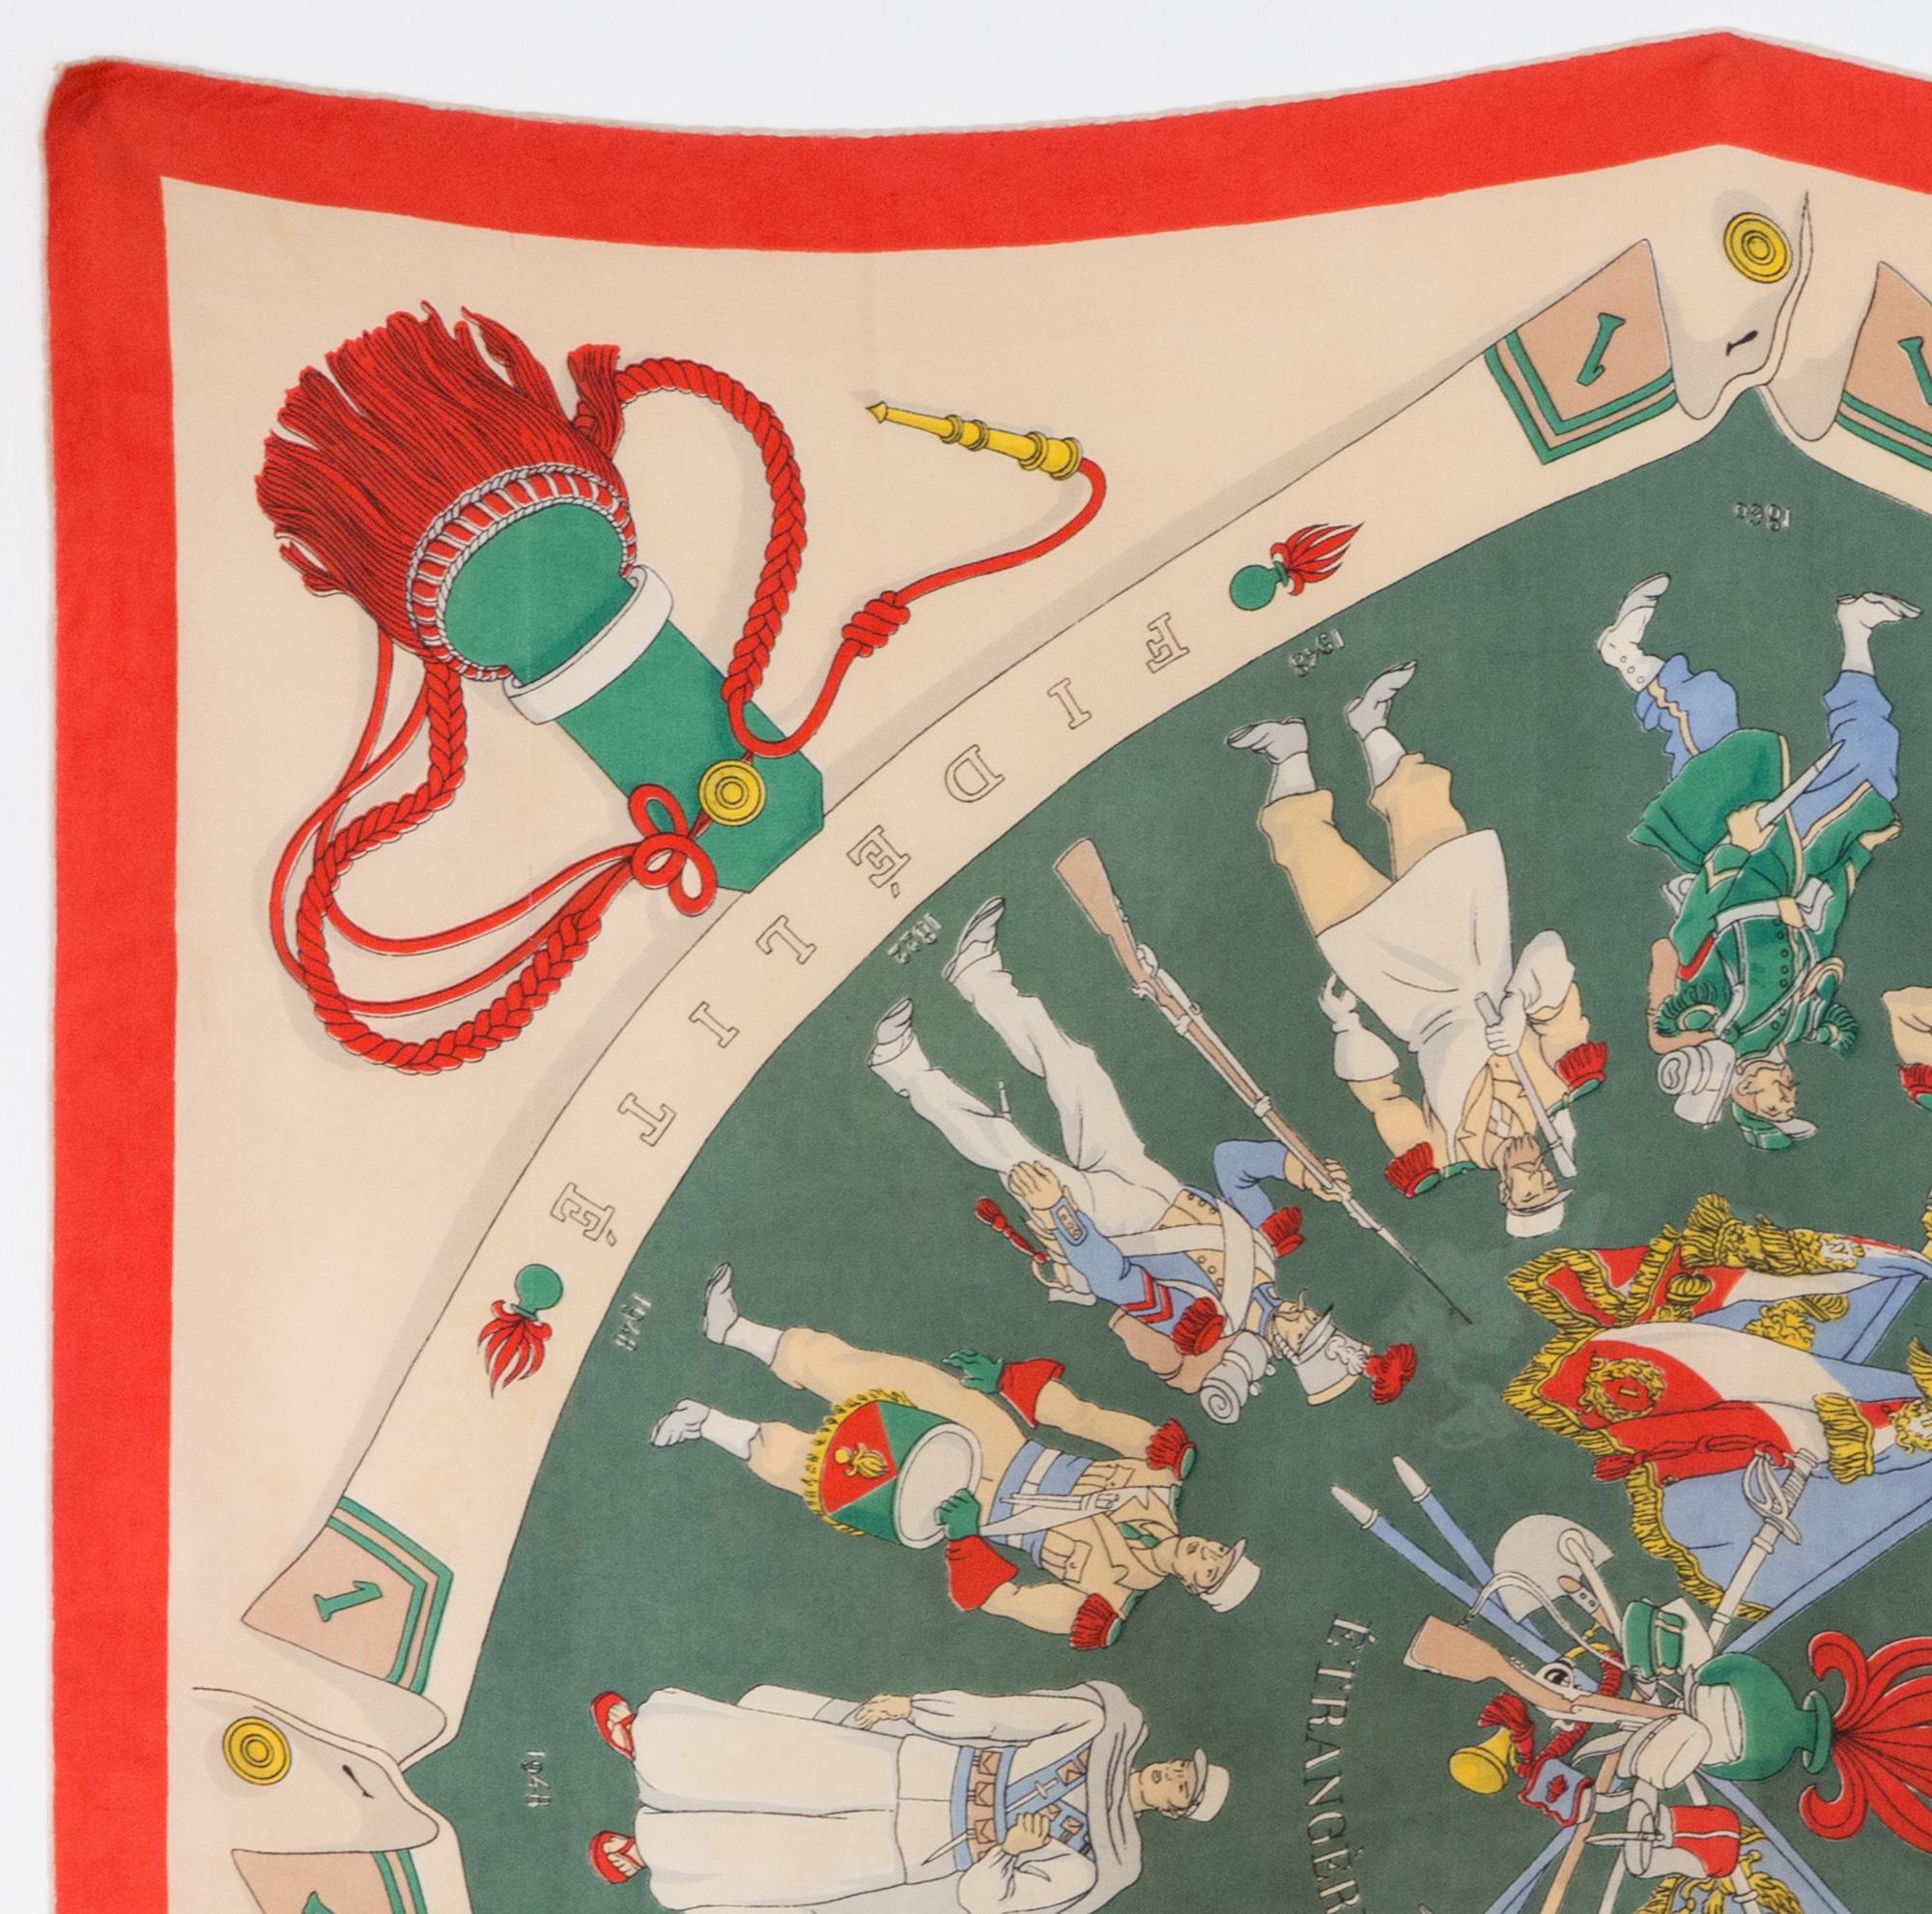 Hermes silk scarf A la Gloire de la Legion Etrangere designed by Hugo Grygkar in 1951 (reissued in 1963), featuring ared and green border. 
In good vintage condition. Made in France.
35,4in. (90cm)  X 35,4in. (90cm)
We guarantee you will receive